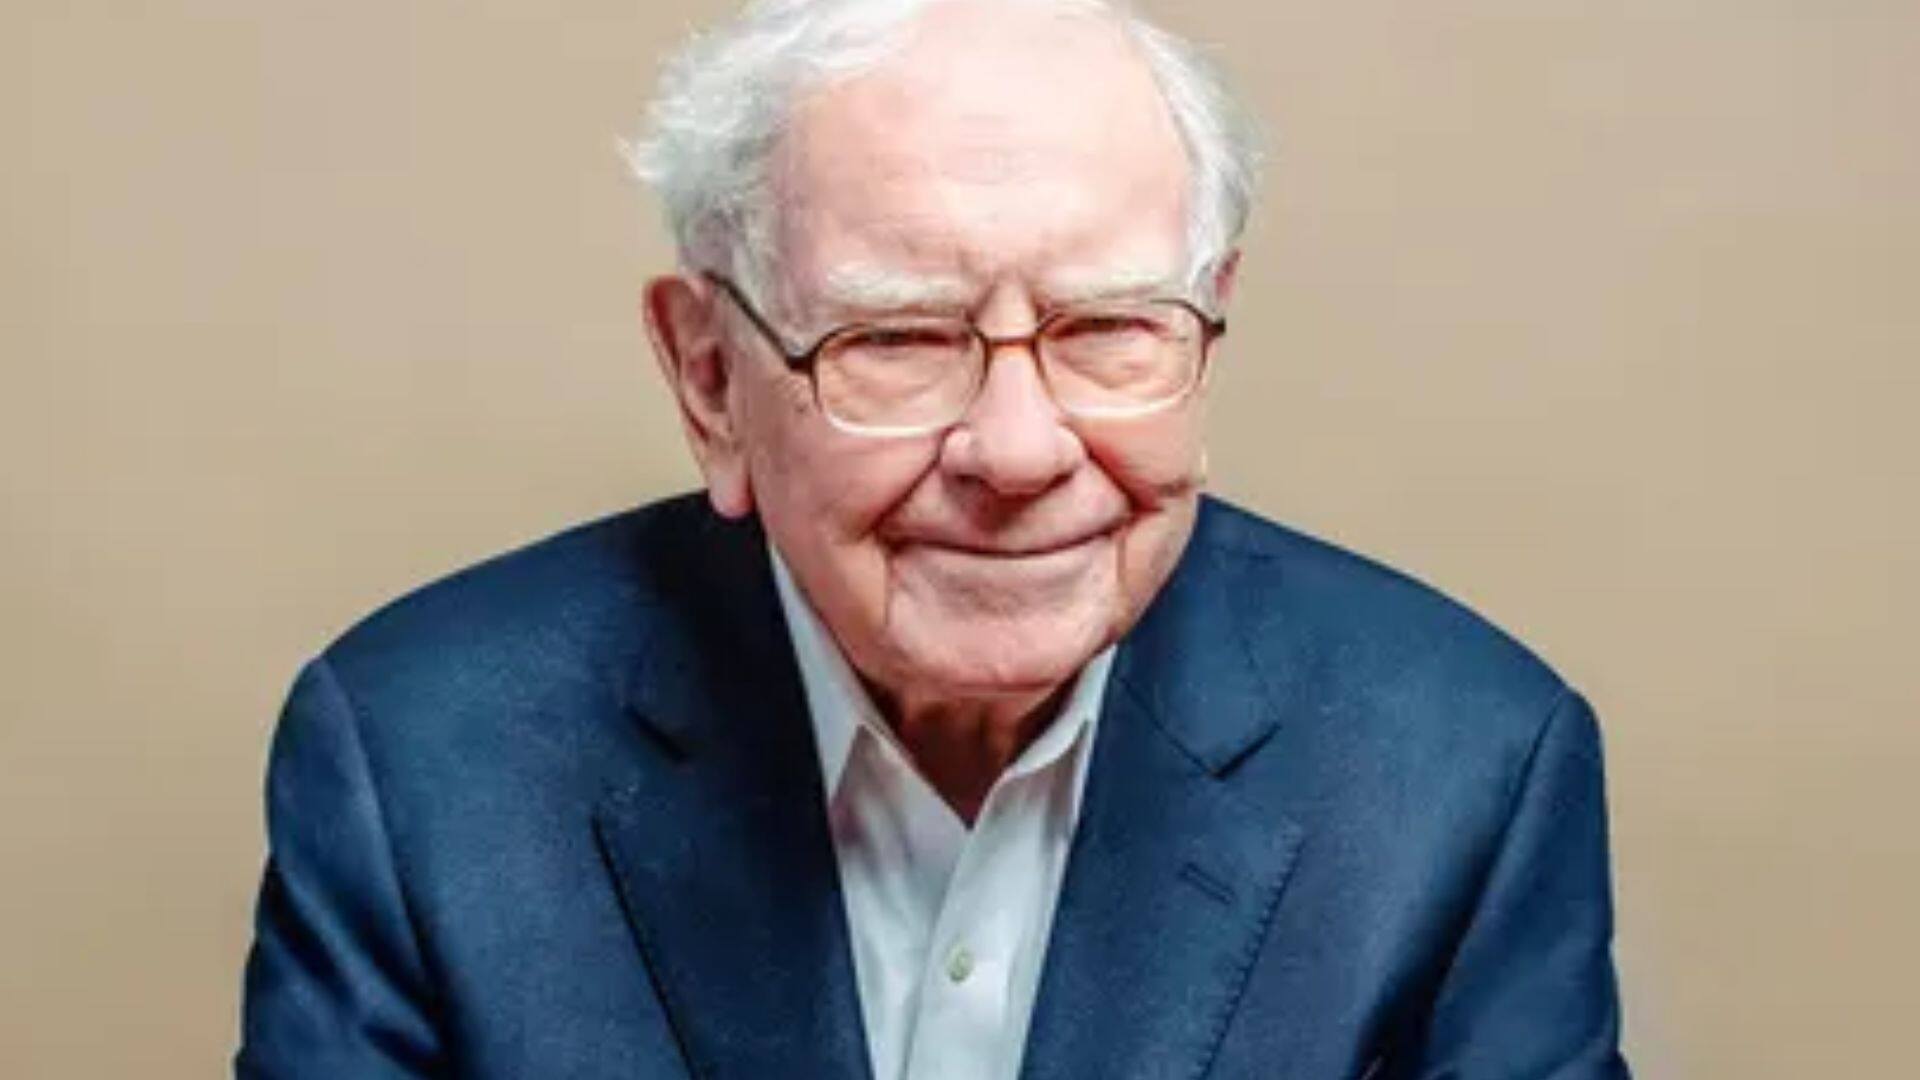 There Are Loads Of Opportunities In A Place Like India: Warren Buffett